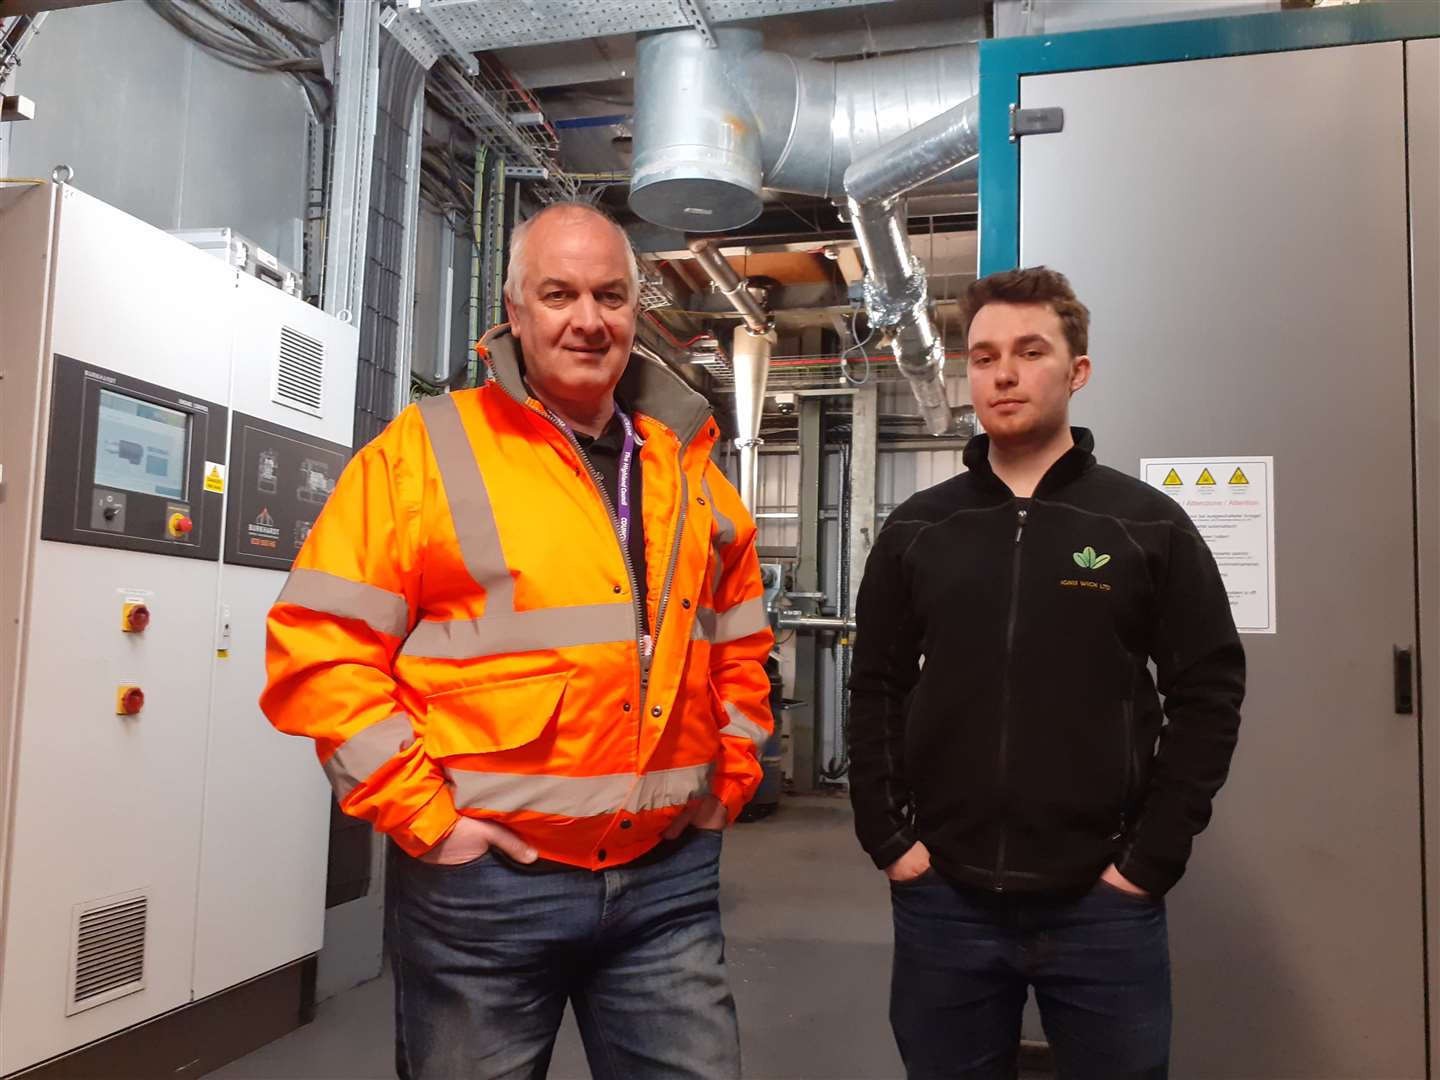 Councillor Raymond Bremner (left) and Harris Gilmore, manager of Ignis Wick Ltd, inside the biomass plant.